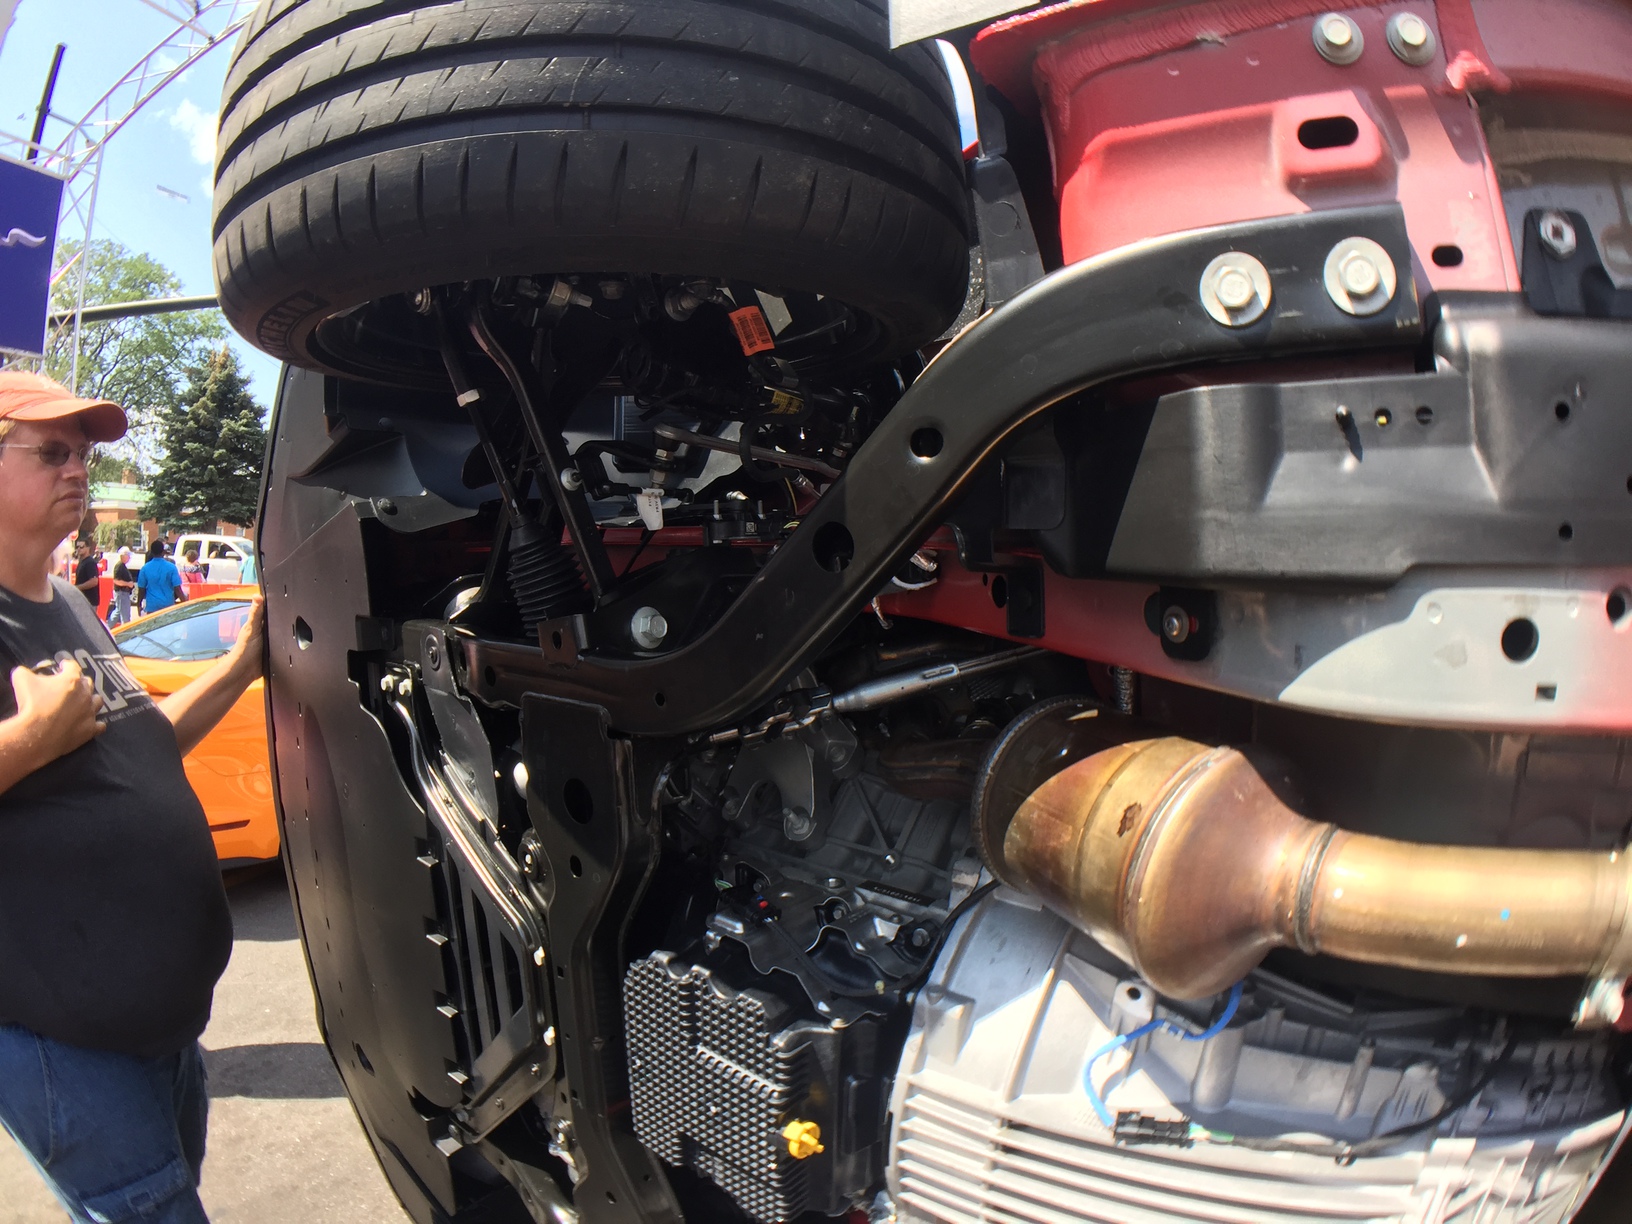 2018 Mustang Undercarriage Pics - 2018 Mustang Undercarriage Pics